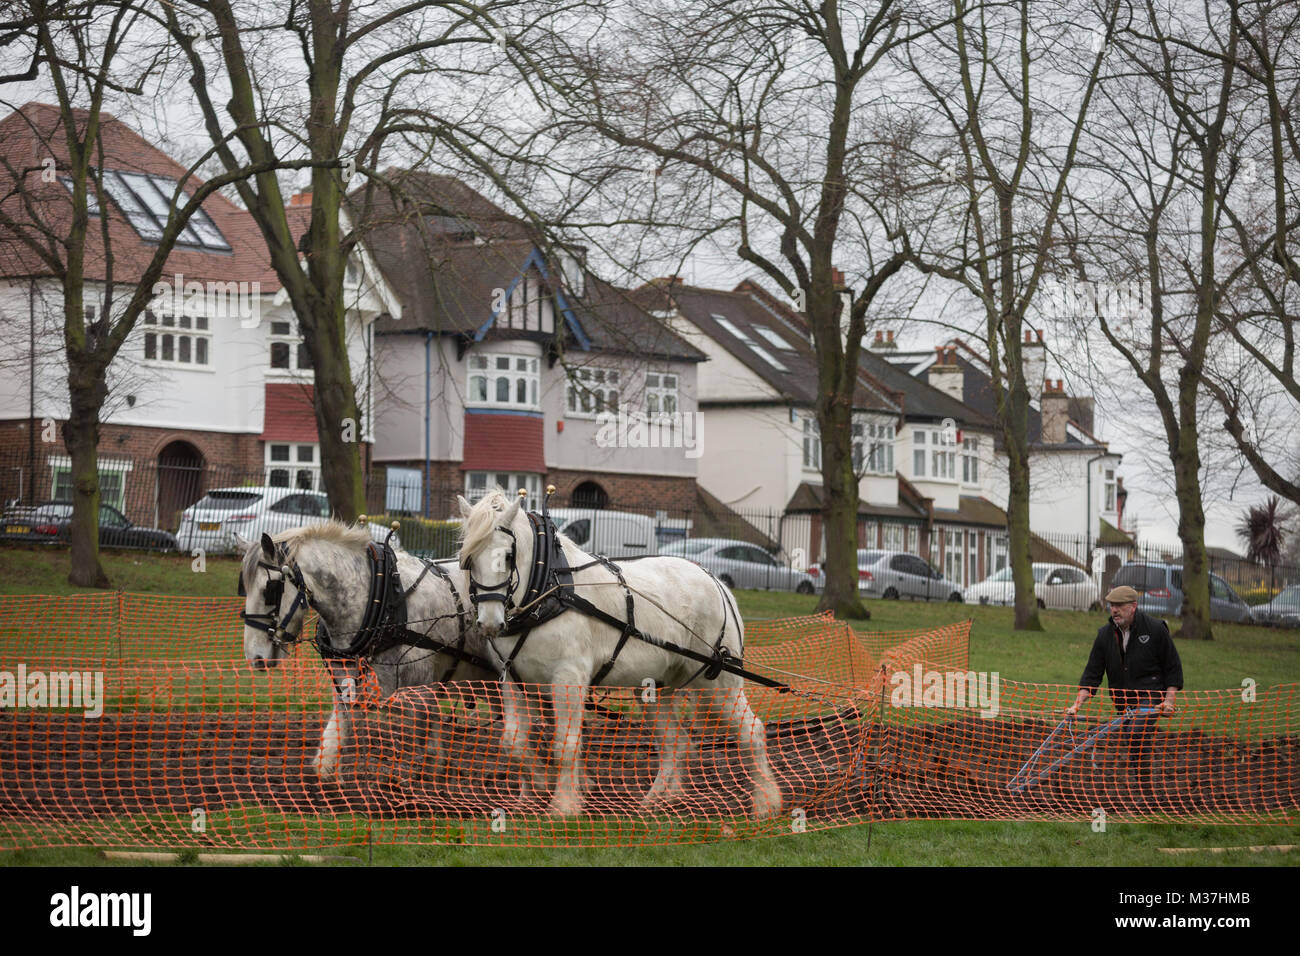 Irish ploughman Tom Nixon leads Shire horses Nobby and Heath as they plough an on-going heritage wheat-growing area in Ruskin Park, a public green space in the borough of Southwark, on 9th February 2018, in London, England. The Friends of Ruskin Park are again growing heritage wheat and crops together with the Friends of Brixton Windmill and Brockwell Bake Association. Shire horses are descended from the medieval warhorse but are a breed under threat. Operation Centaur, which maintains the last working herd of Shires in London is dedicated to the protection and survival of the breed. Stock Photo